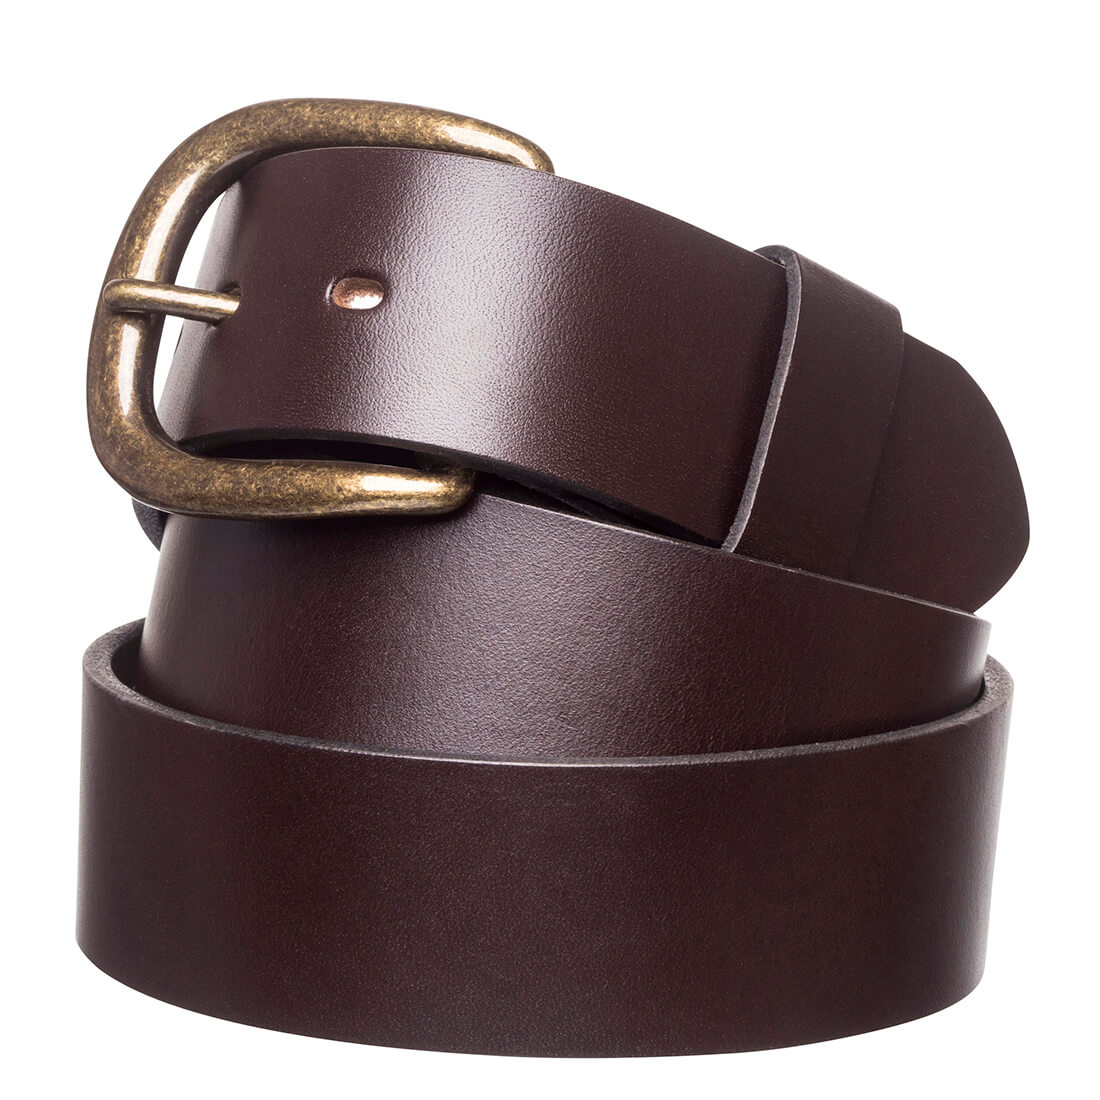 R.M. Williams Traditional 1 1/2 Inch Belt | Davids Of Haslemere